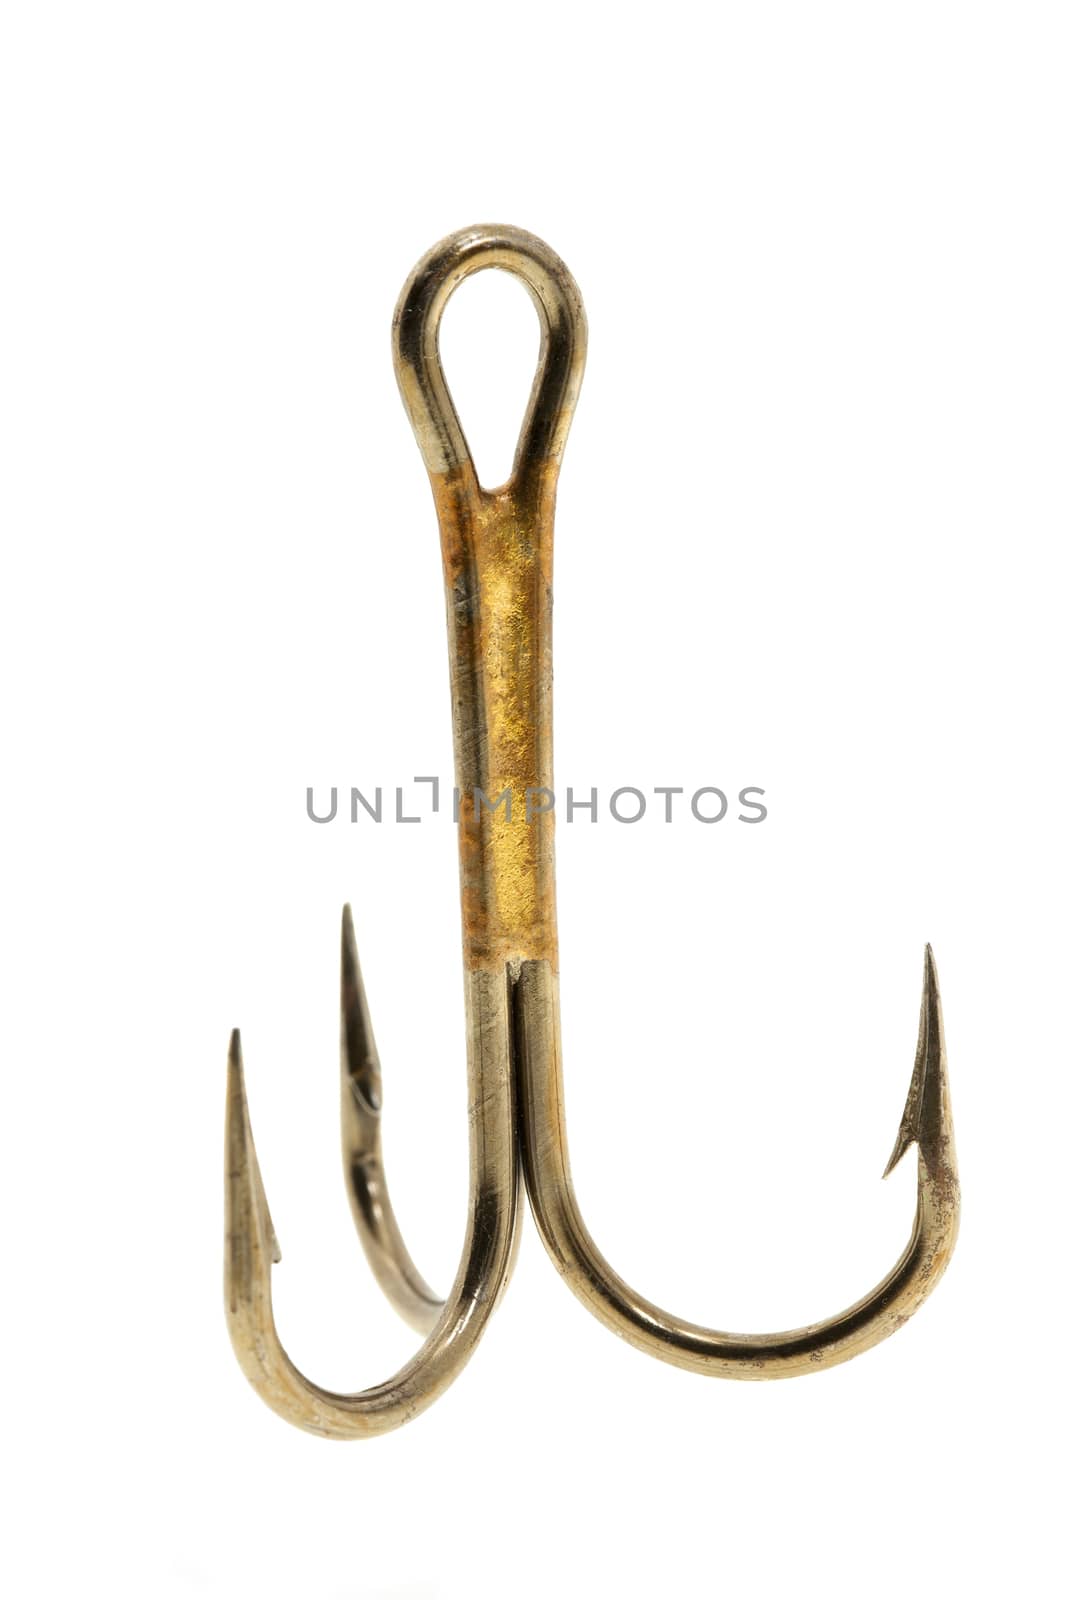 photographed close-up on a white background a triple fish hook, a small depth of field